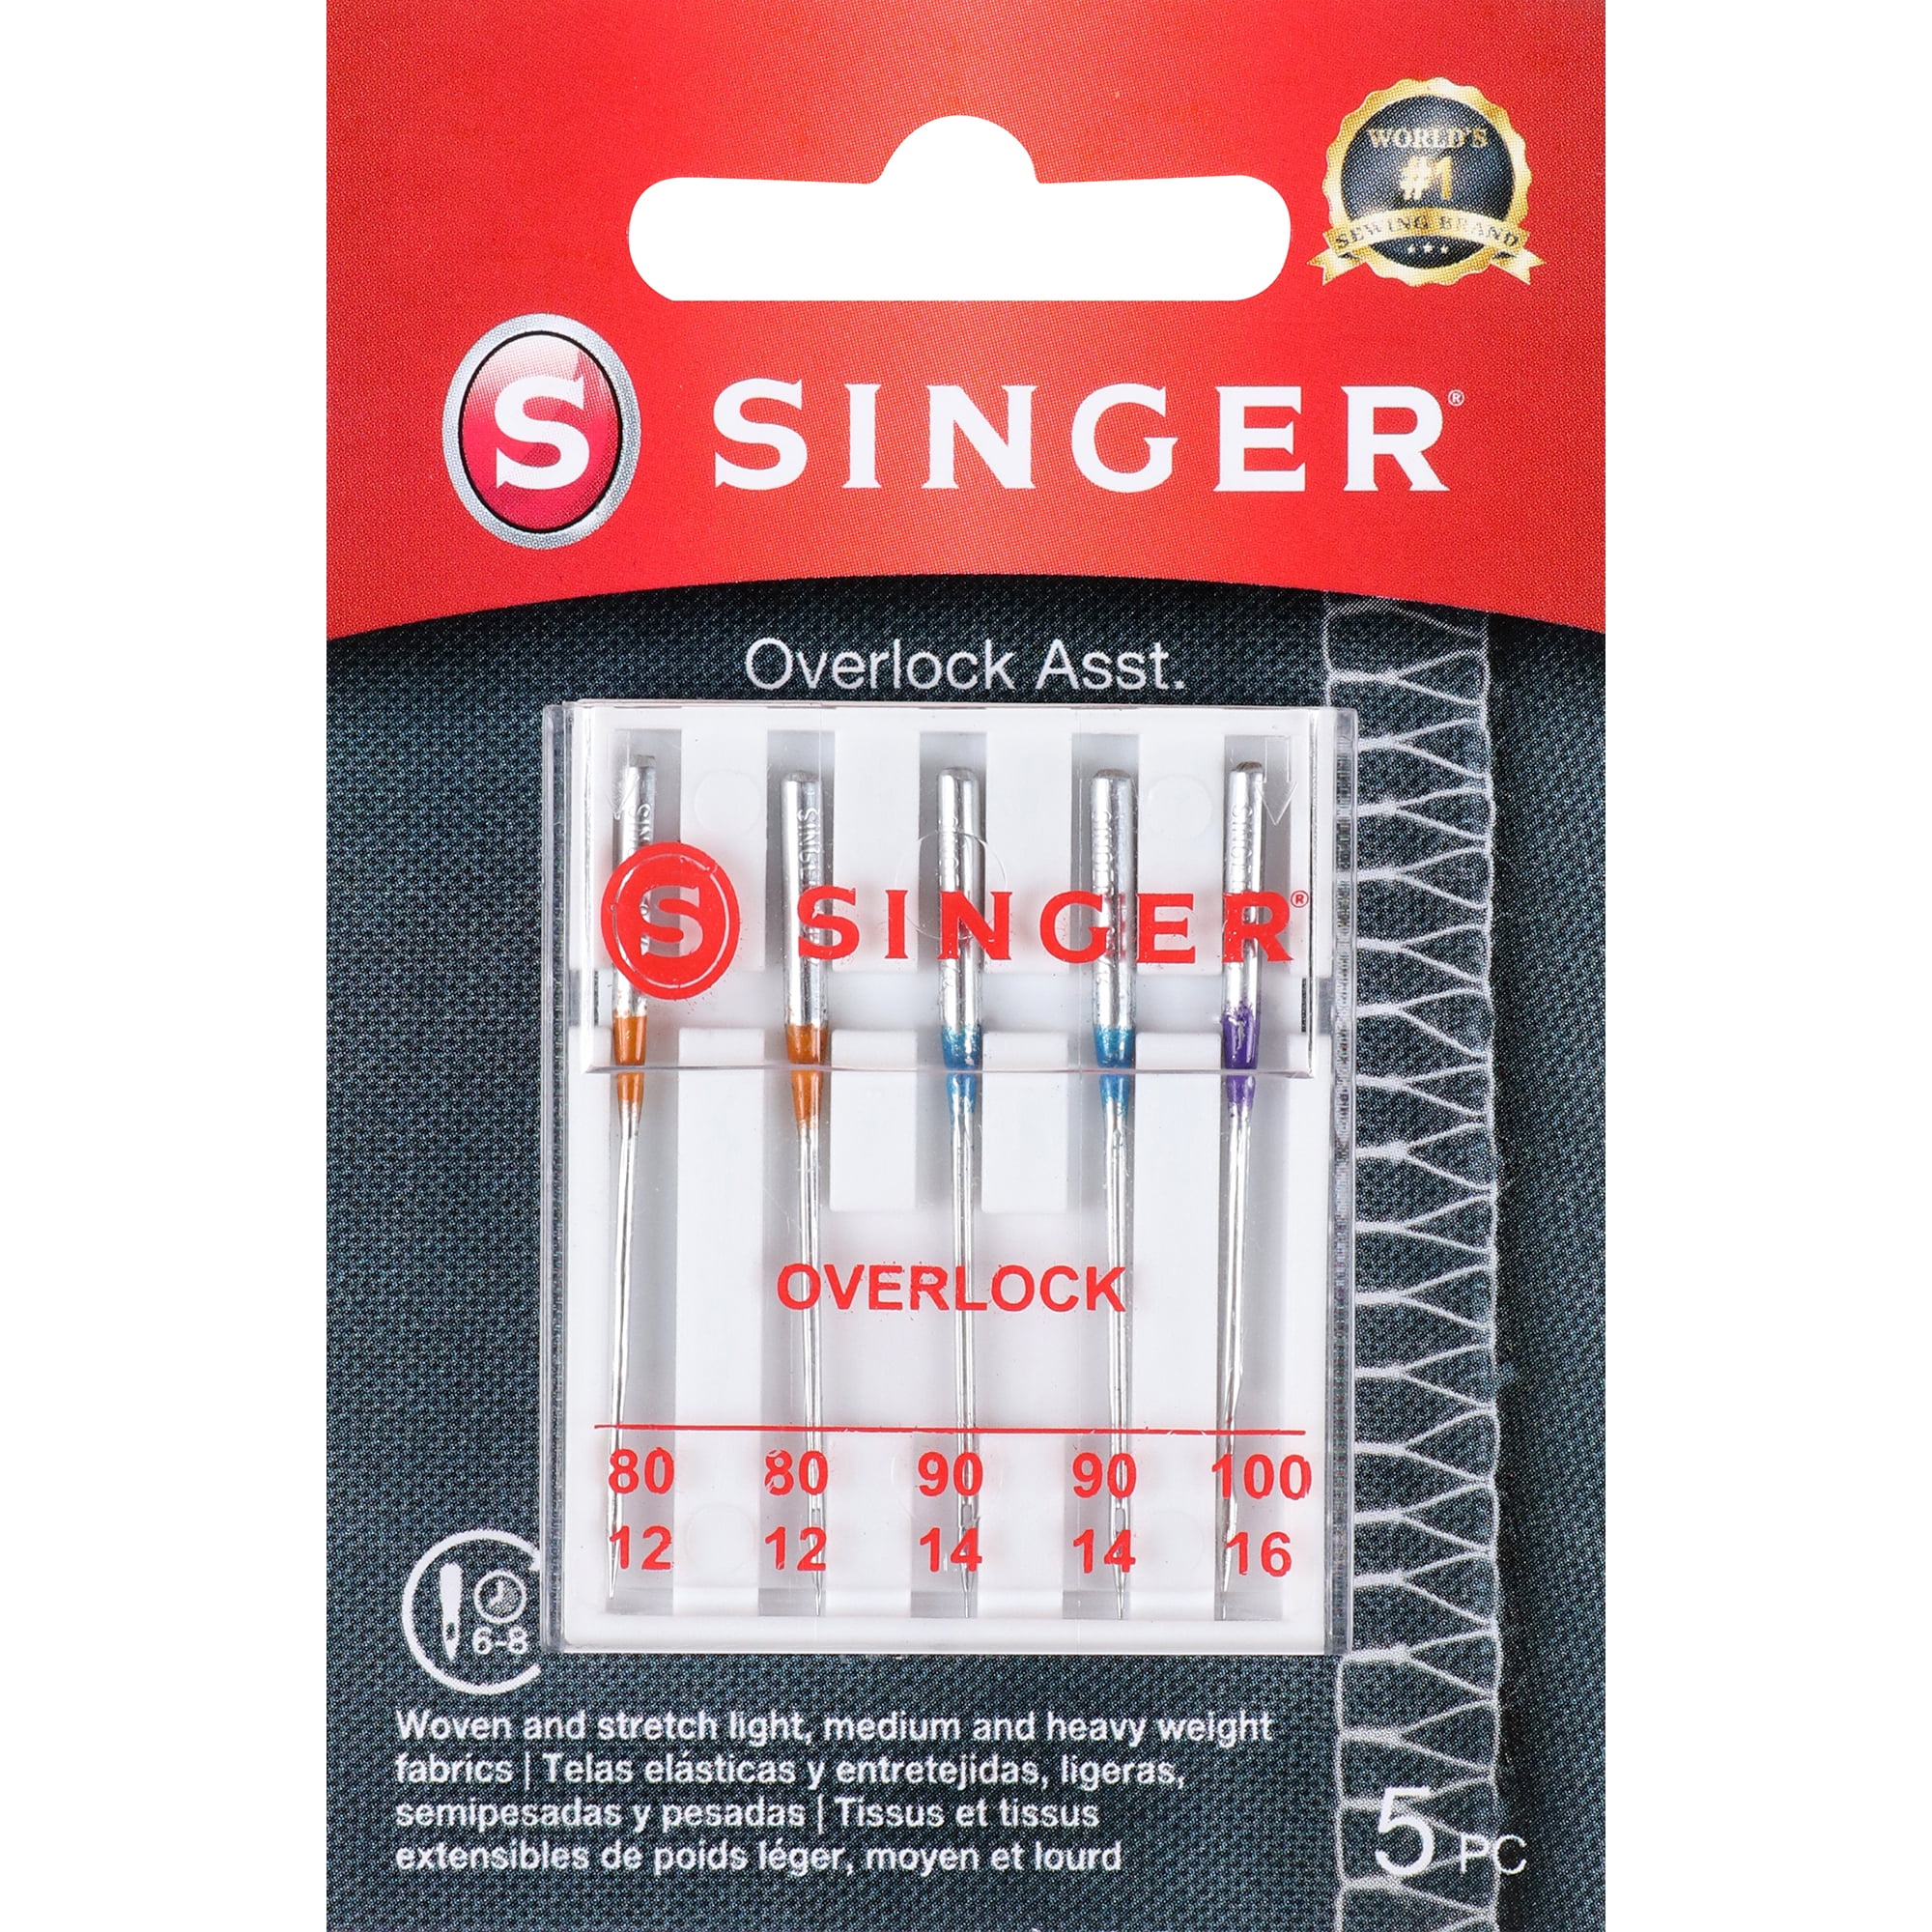 30 Pcs Embroidery Sewing Machine Needles Size 90/14 130/705H HAX1 Sewing Needles for Brother Sewing Machine (3 Pack of 10 Needles)